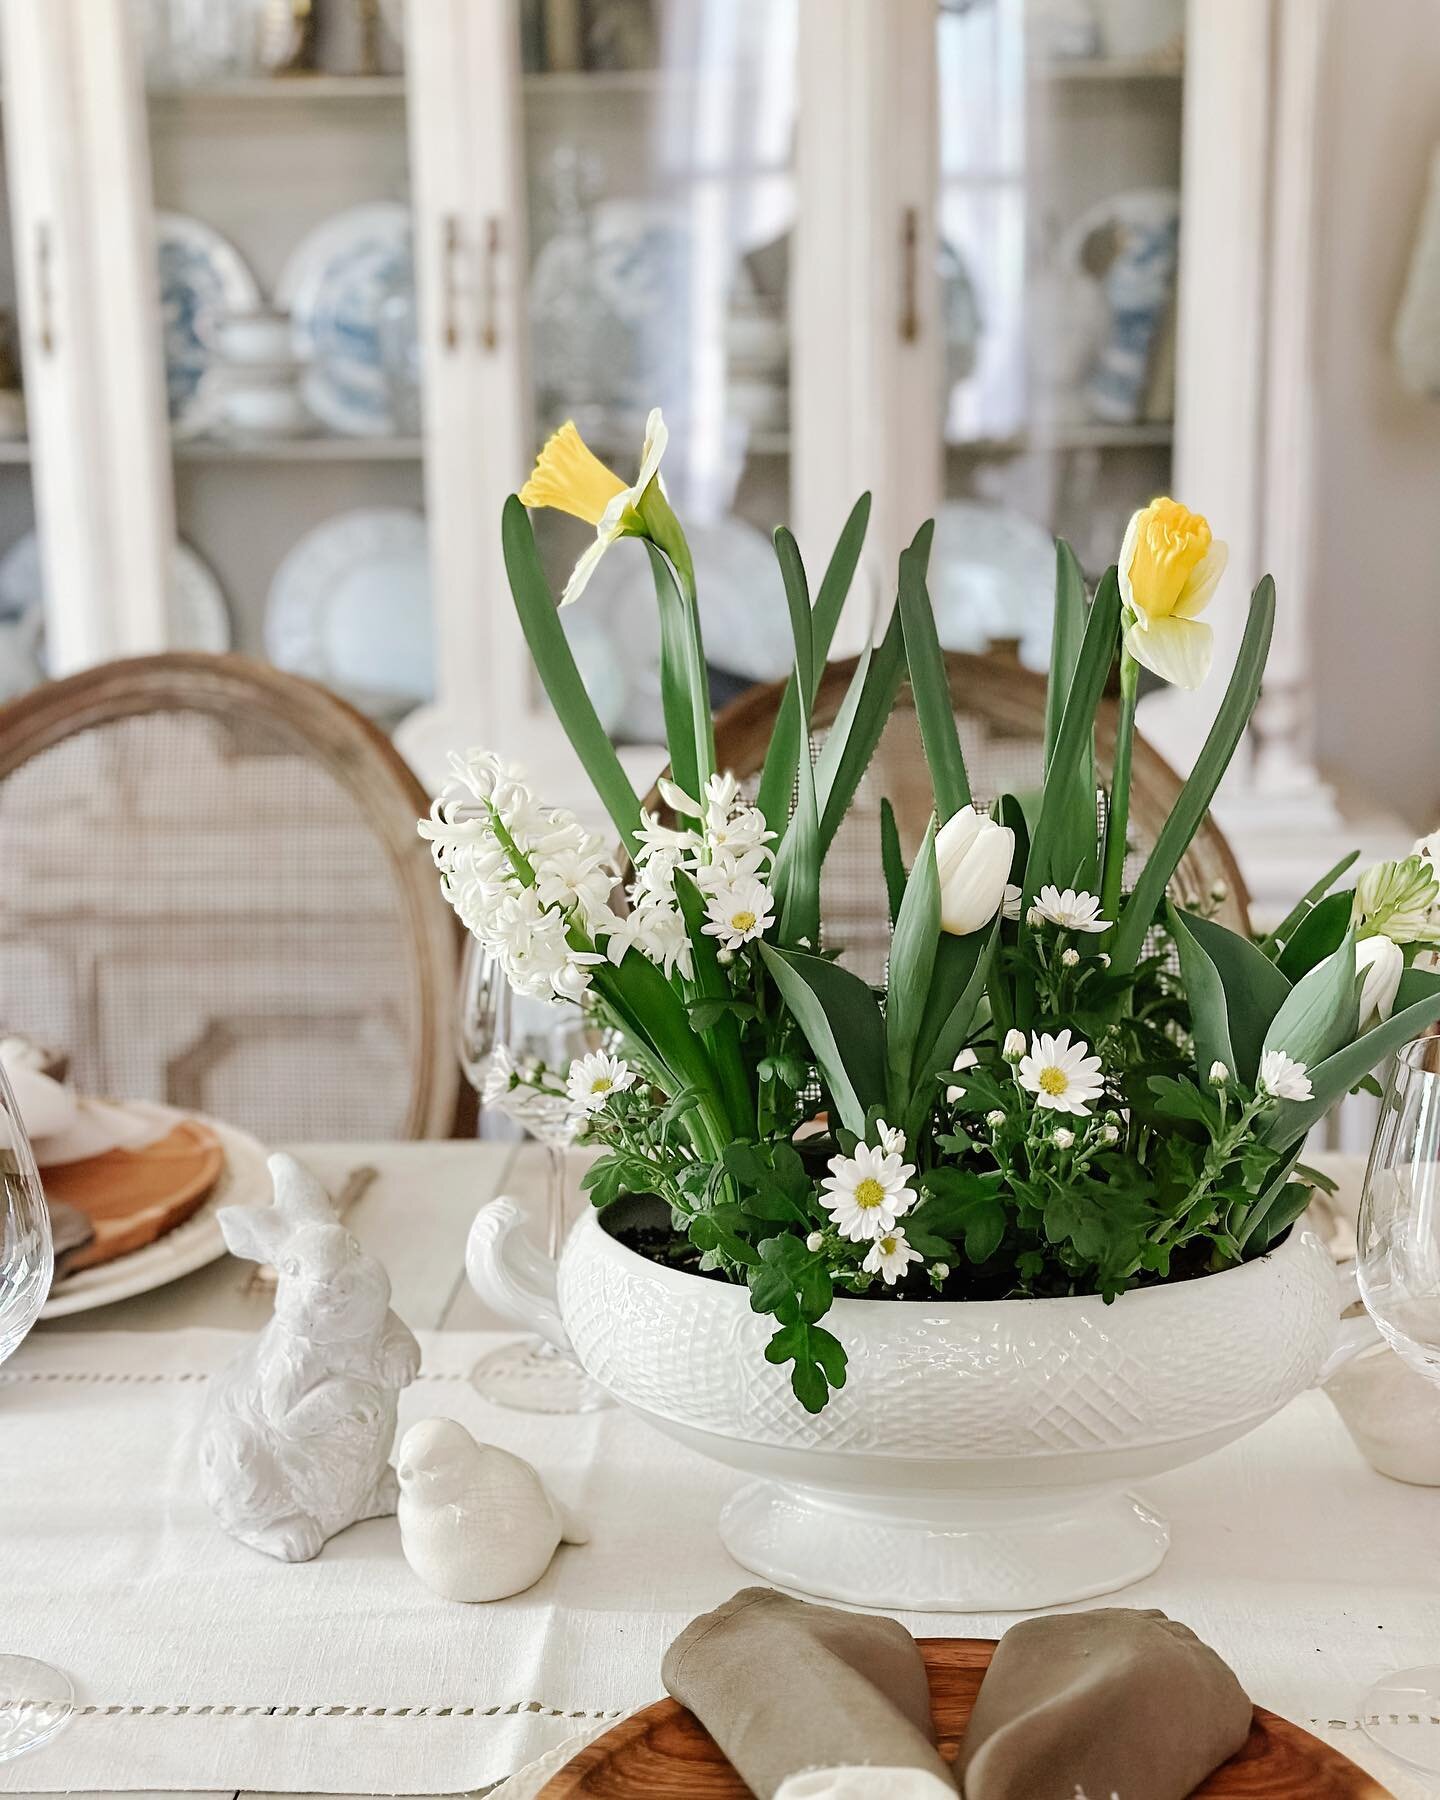 Happy Easter, from our home to yours! 🐰💕

Dreaming of last year&rsquo;s tablescape since we&rsquo;re not hosting Easter dinner this year. I foresee our dining room table being covered in wallpaper for the next few weeks as we tackle this big projec